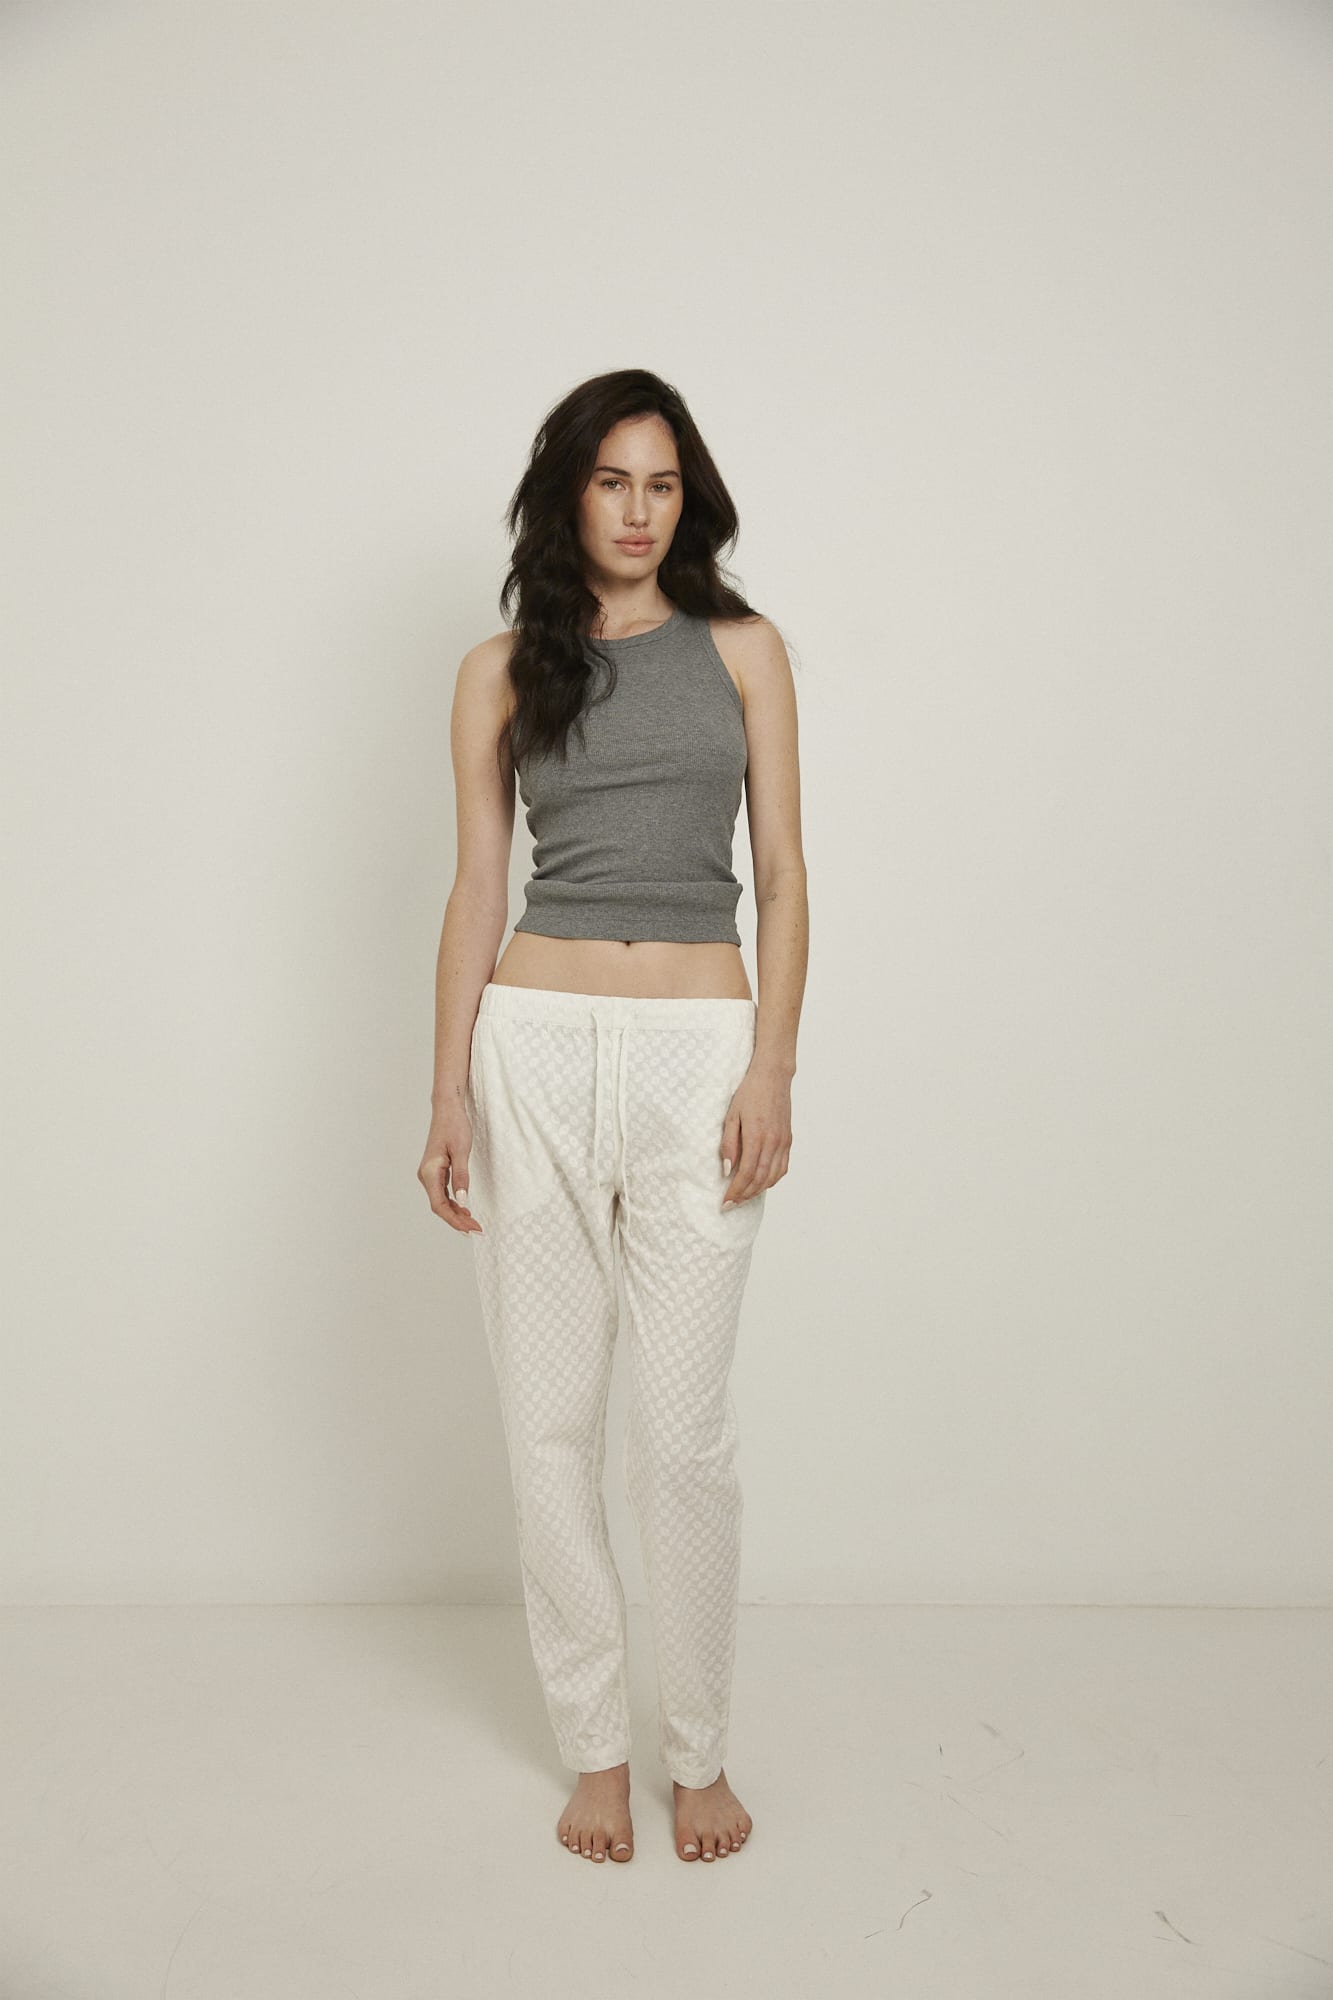 Women’s pyjama pant.  Made from 100% organic cotton, in white colour featuring delicate all over embroidery. These pants feature an elasticated waistband with a drawstring for comfort.